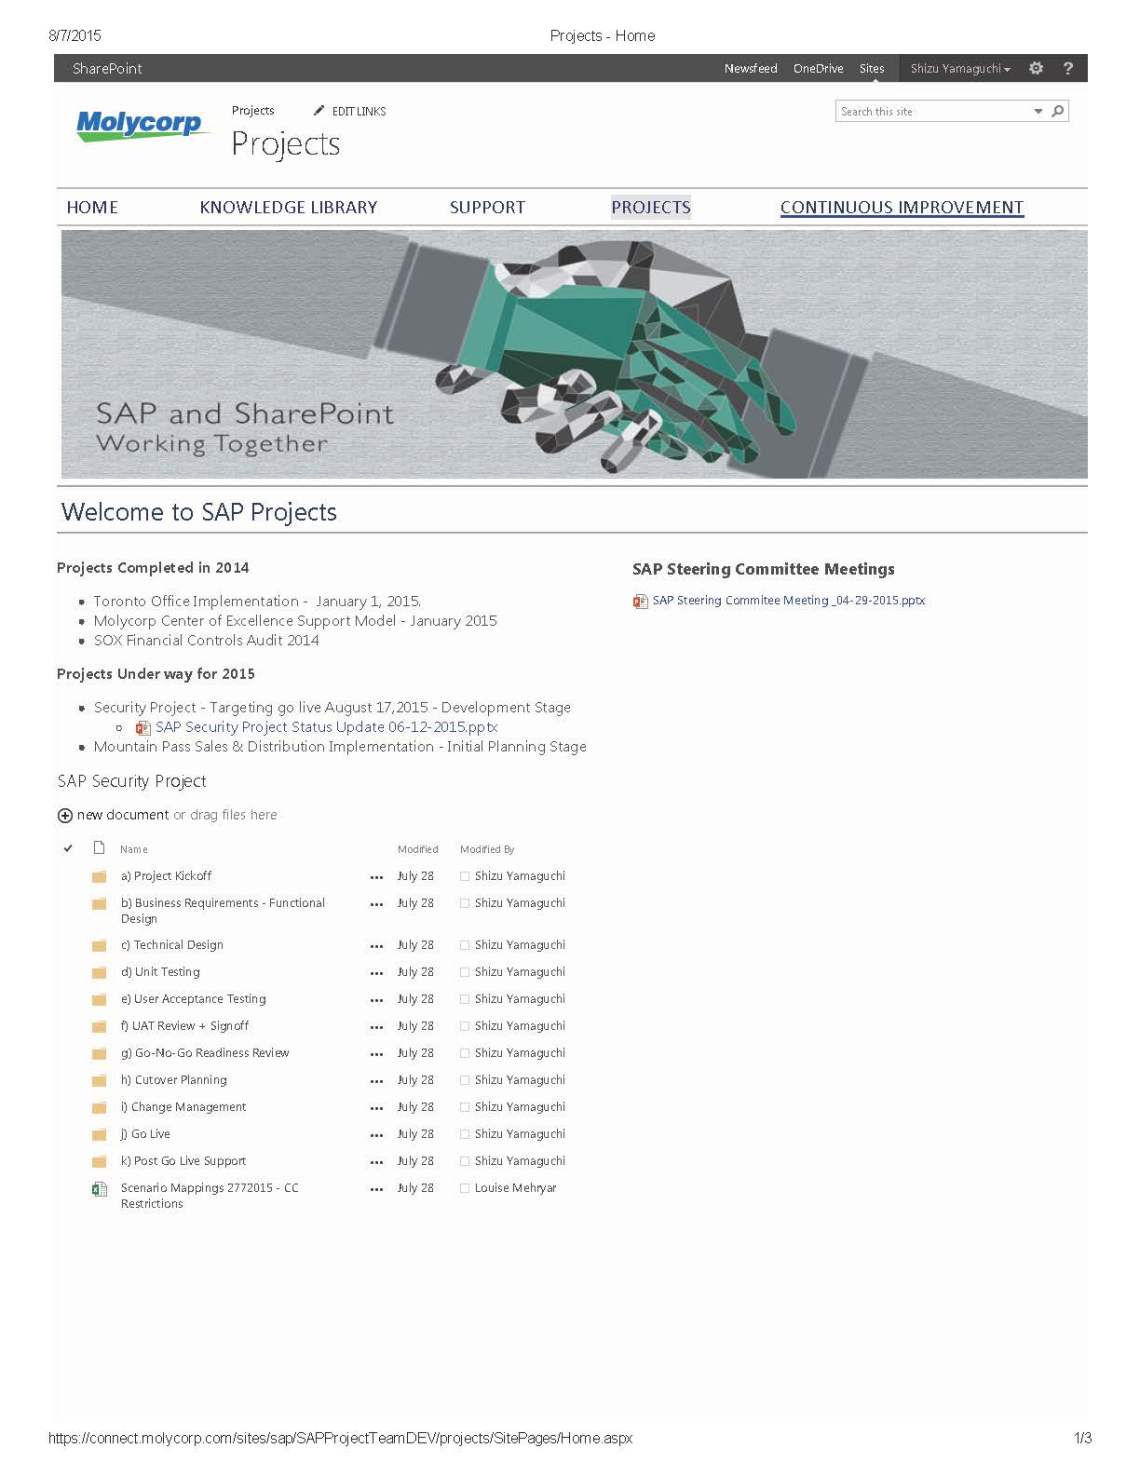 SAP SharePoint Site Page